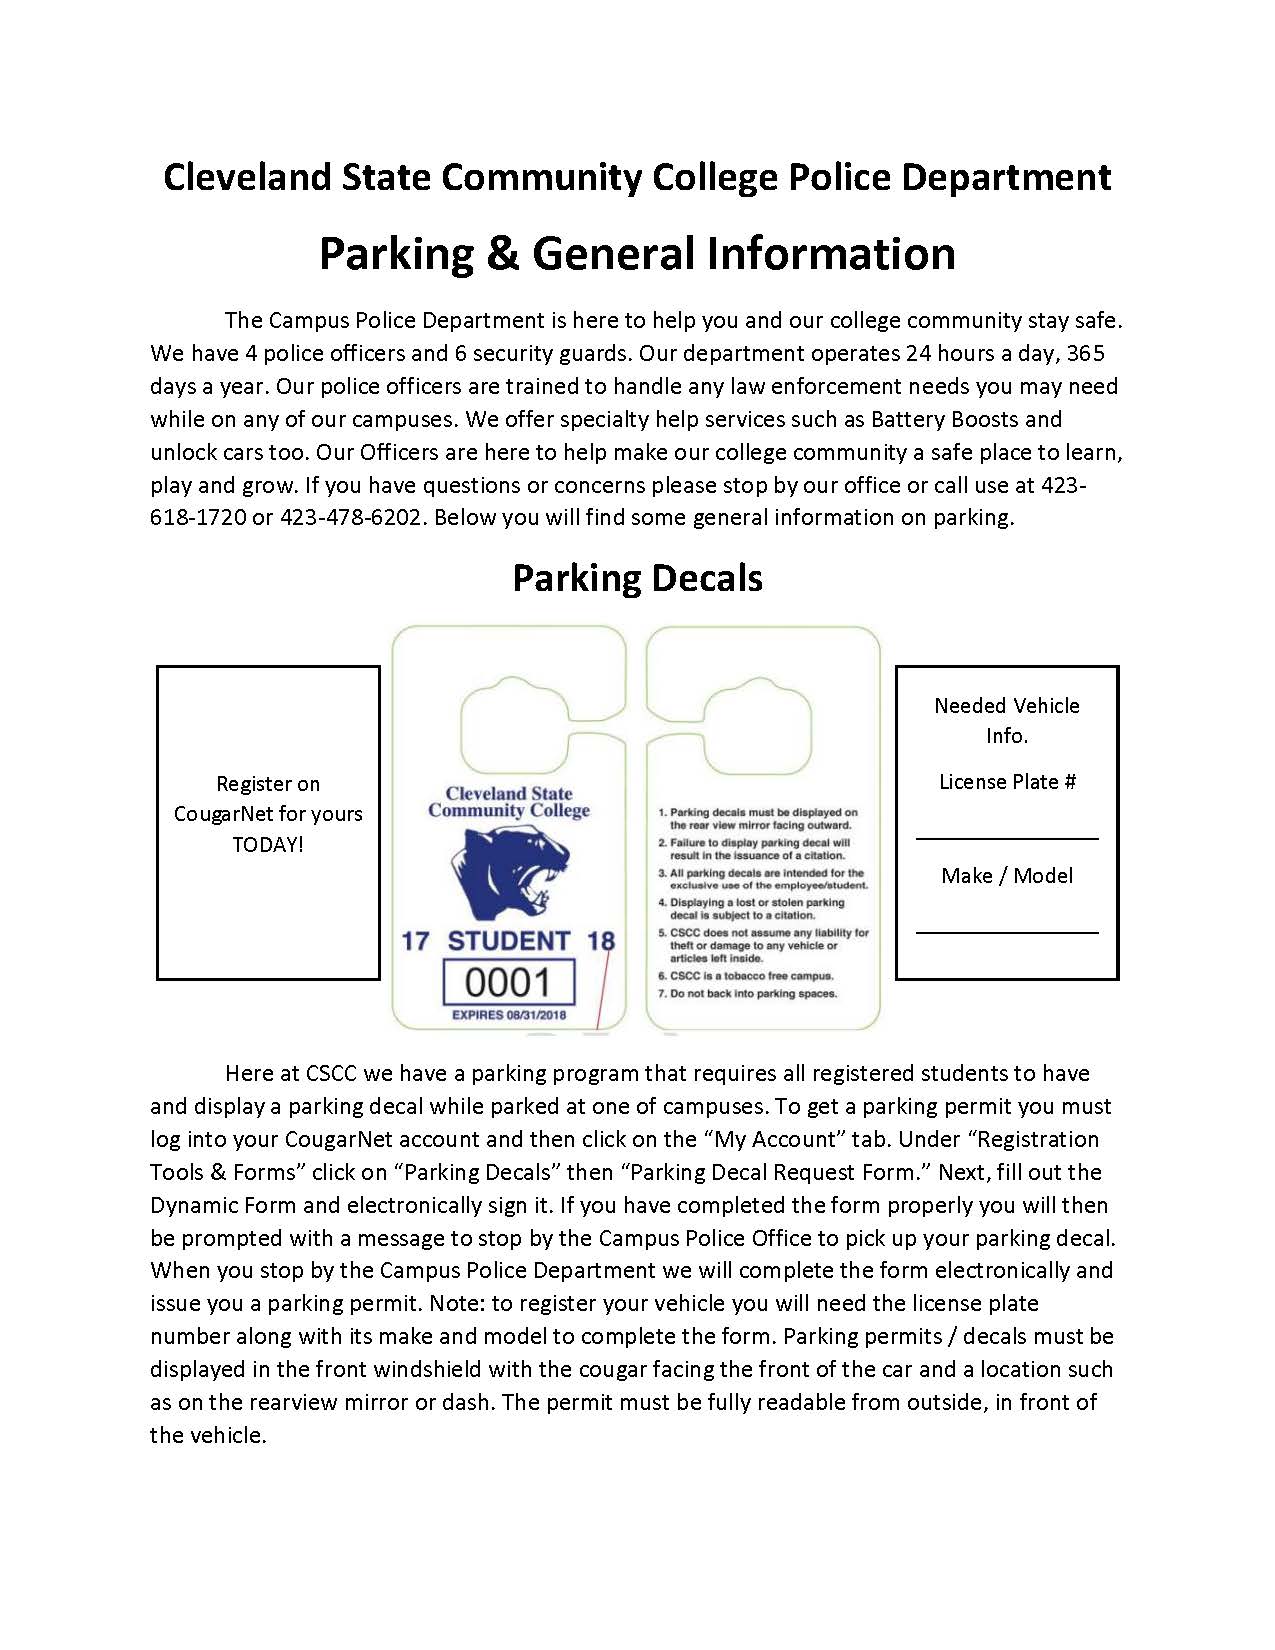 Parking permit instructions. PDF available at link above.